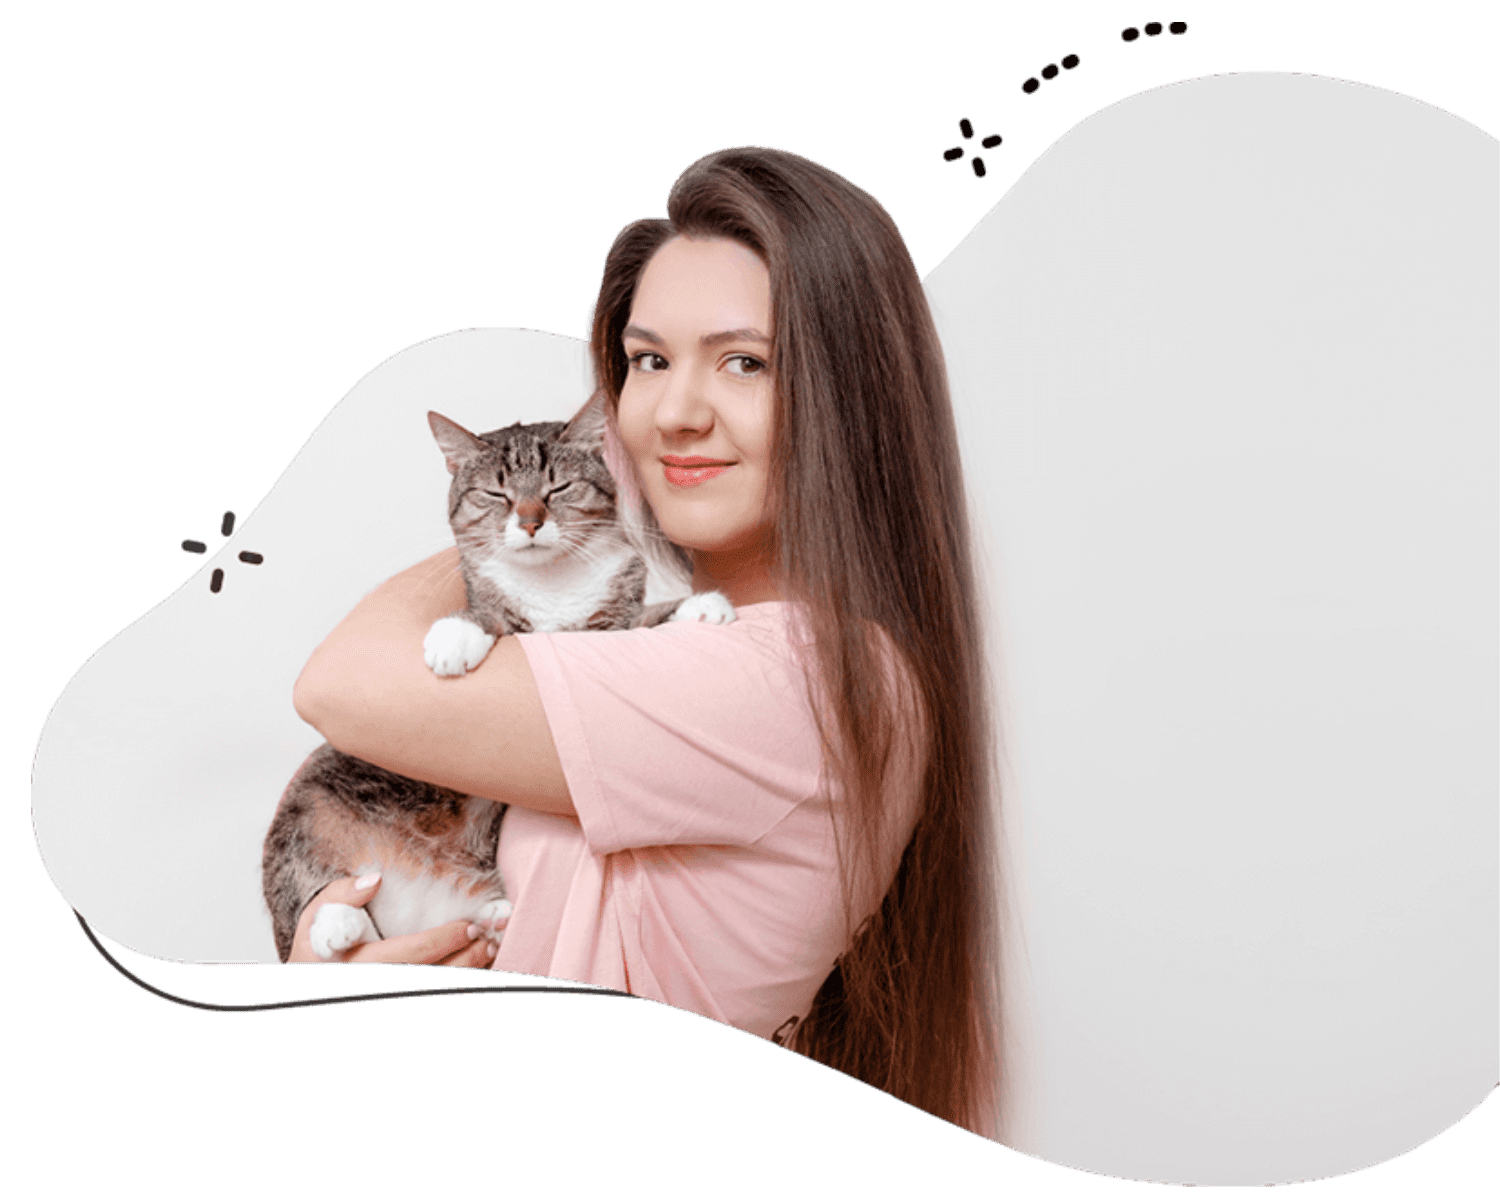 Female cat sitter in a pink tee shirt holding a british longhair cat in her arms who provides cat sitting services in Dubai